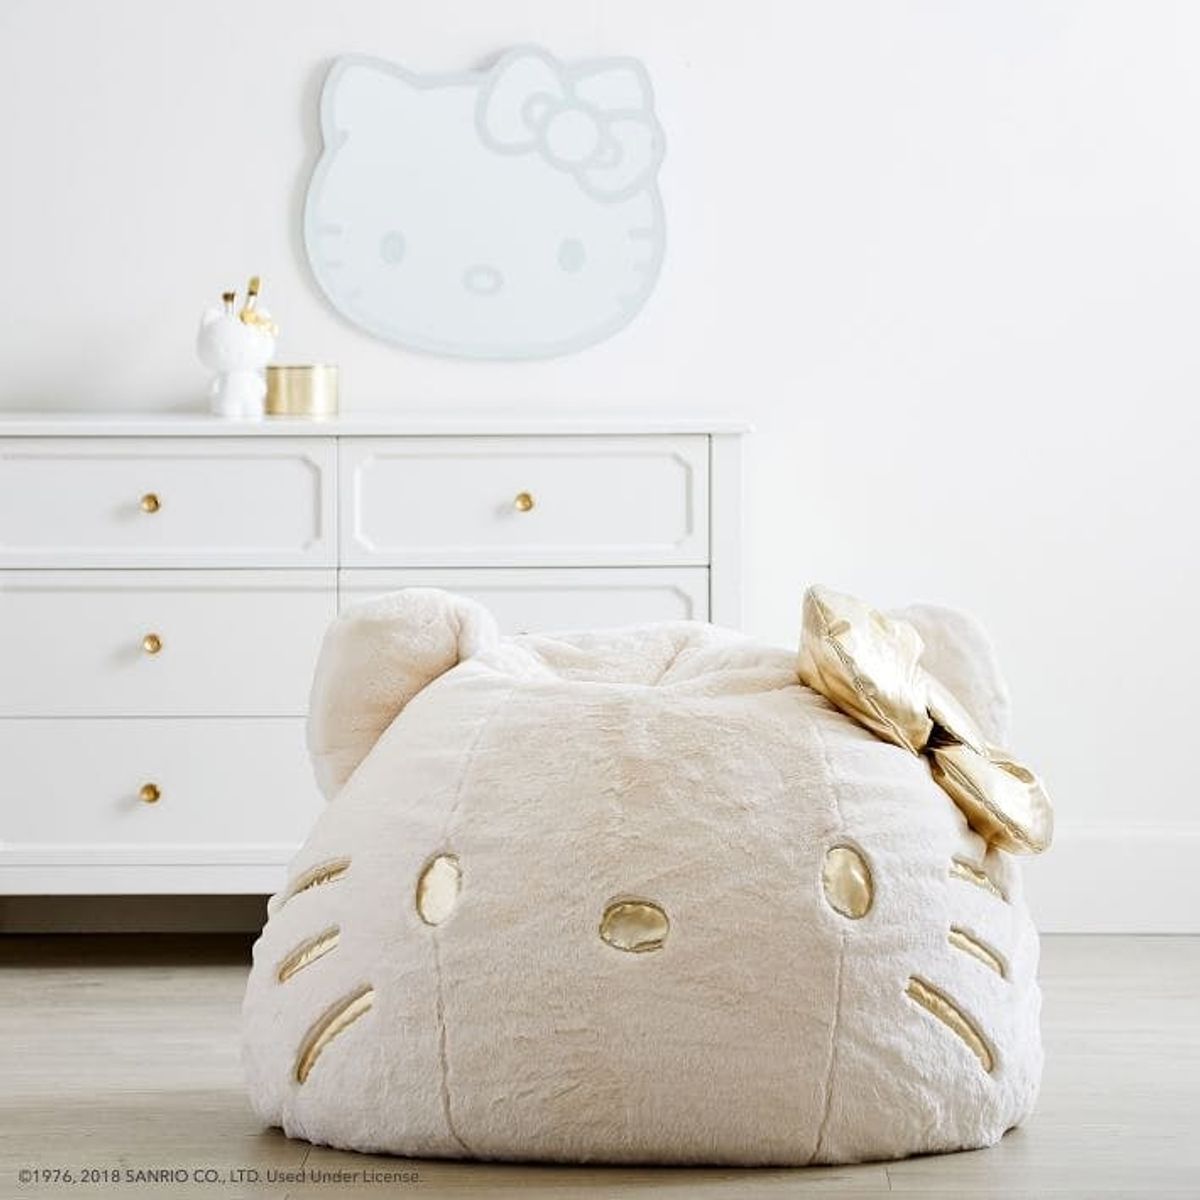 Every Adorable Piece You Need from the Hello Kitty x PB Teen Collab